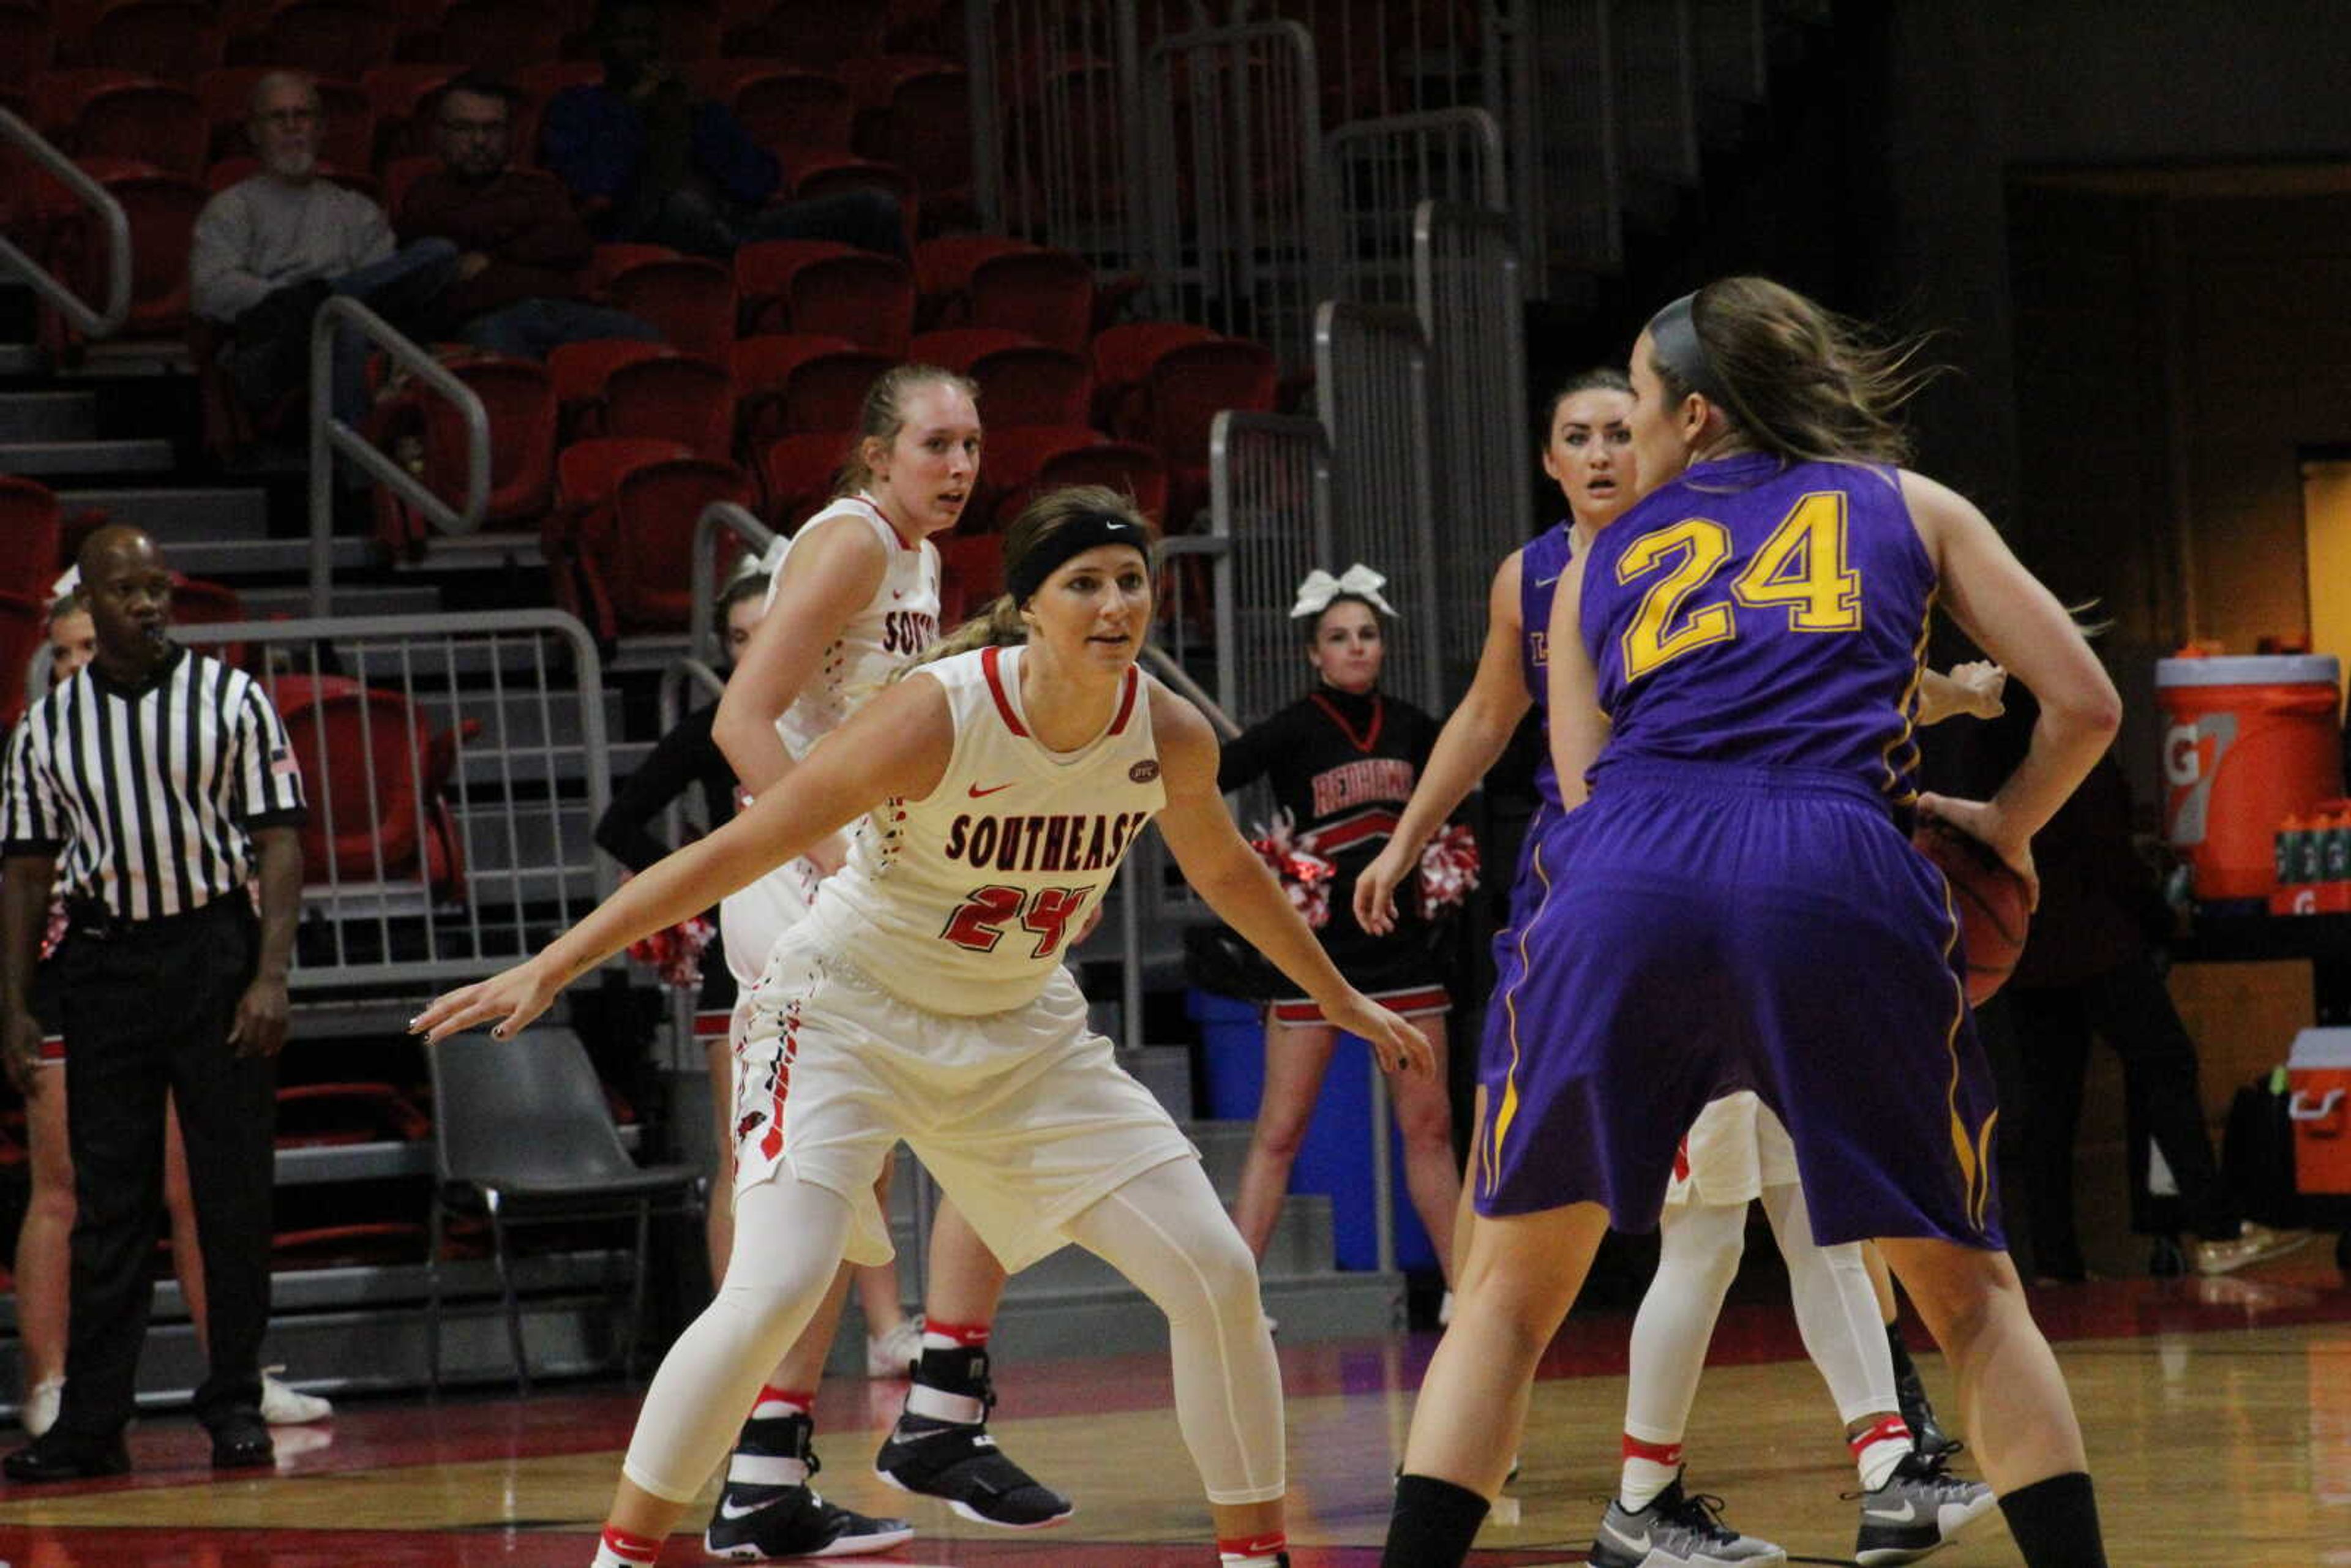 Women's basketball team depth put to the test due to injuries